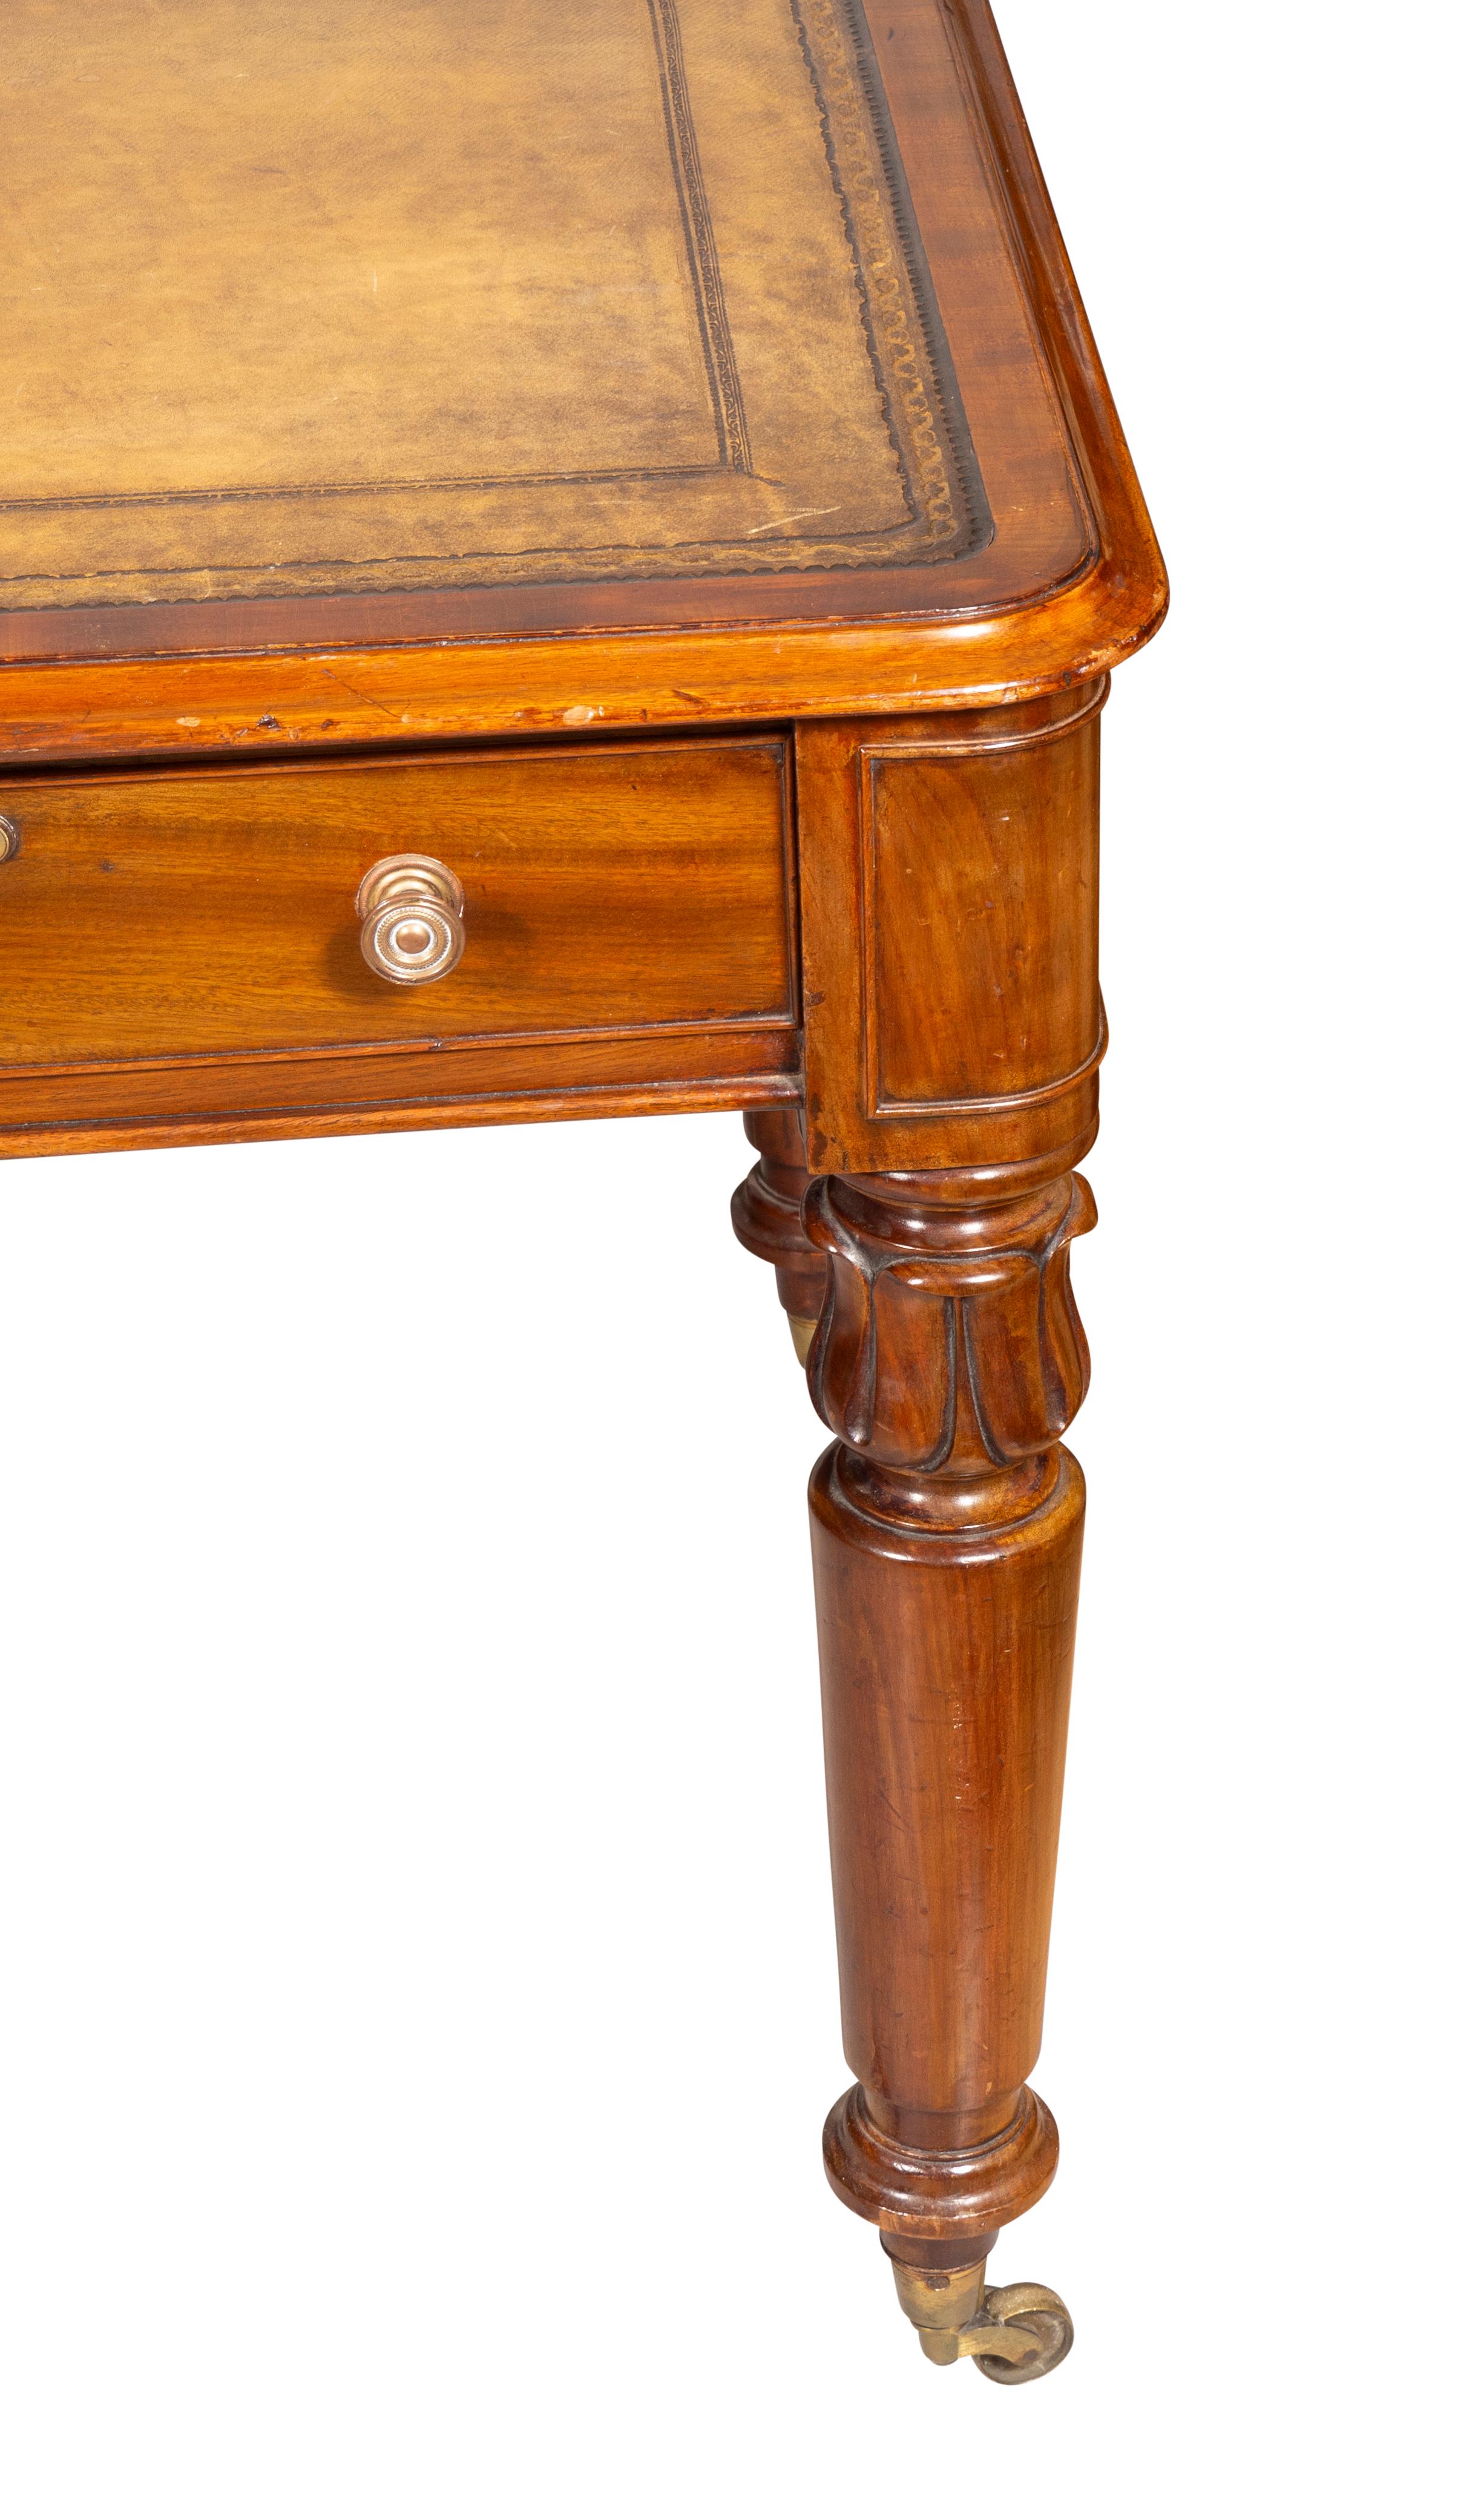 Early Victorian Mahogany Writing Table With Cope & Collinson Casters For Sale 4